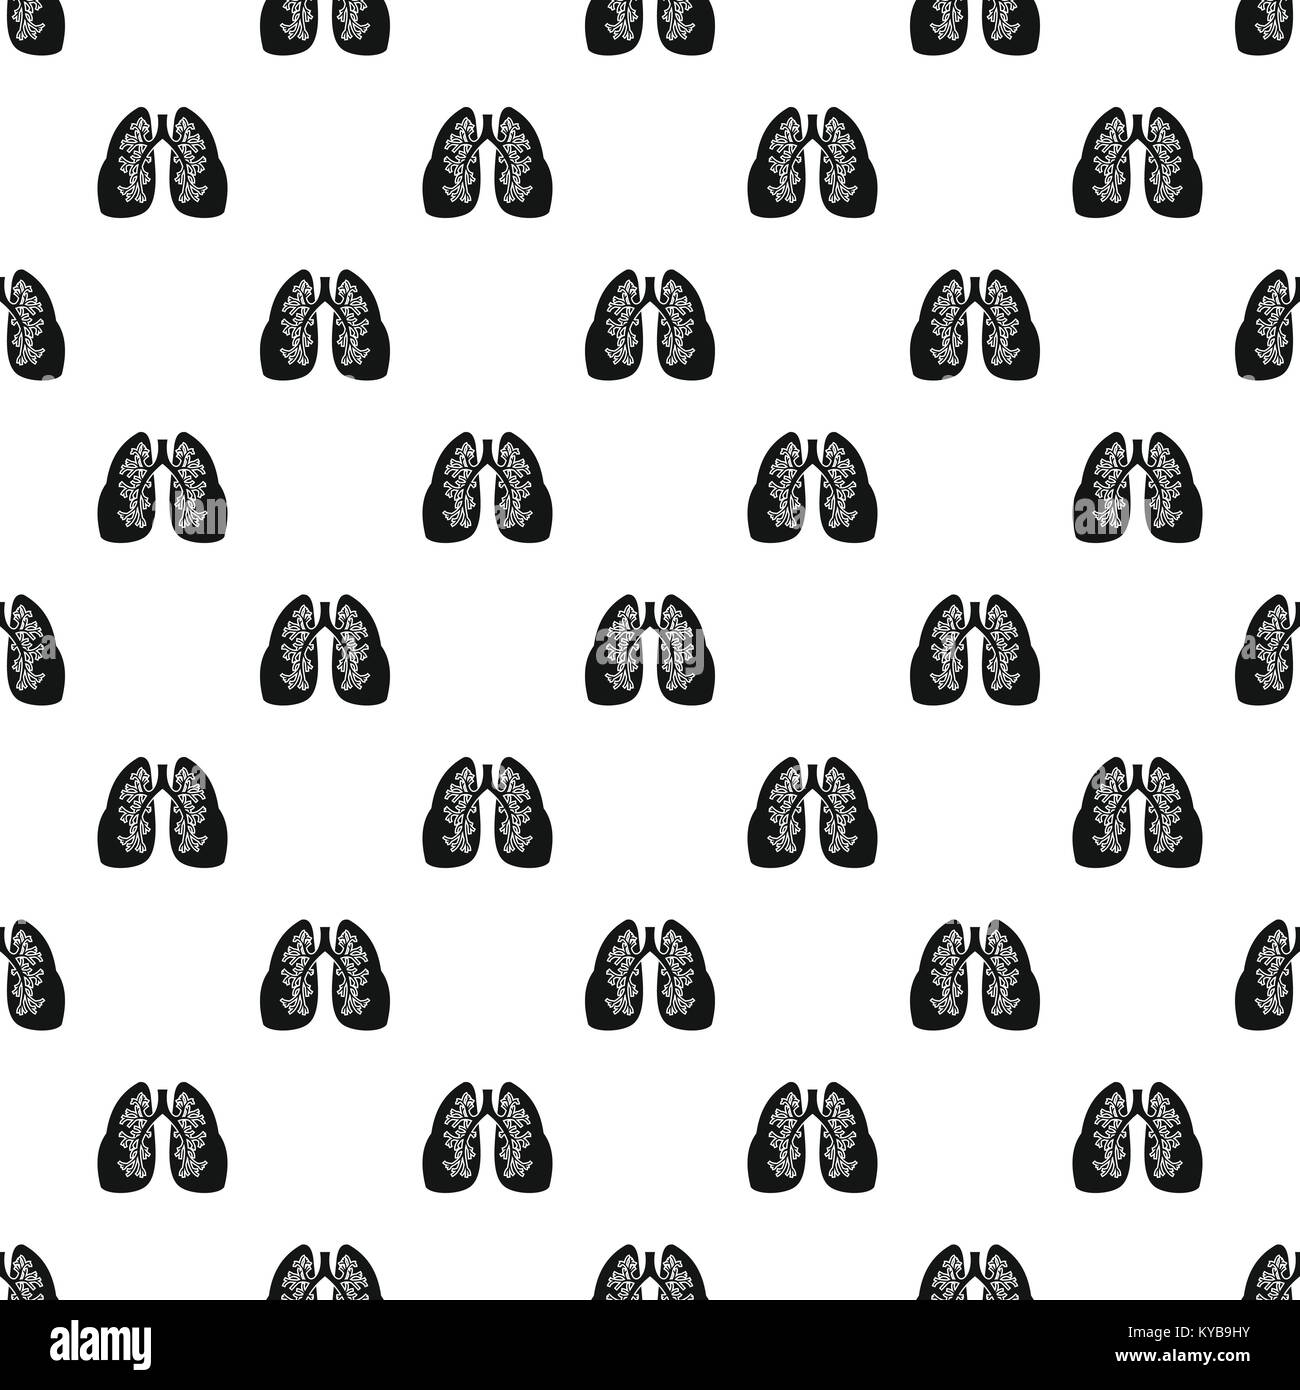 Lungs pattern vector Stock Vector